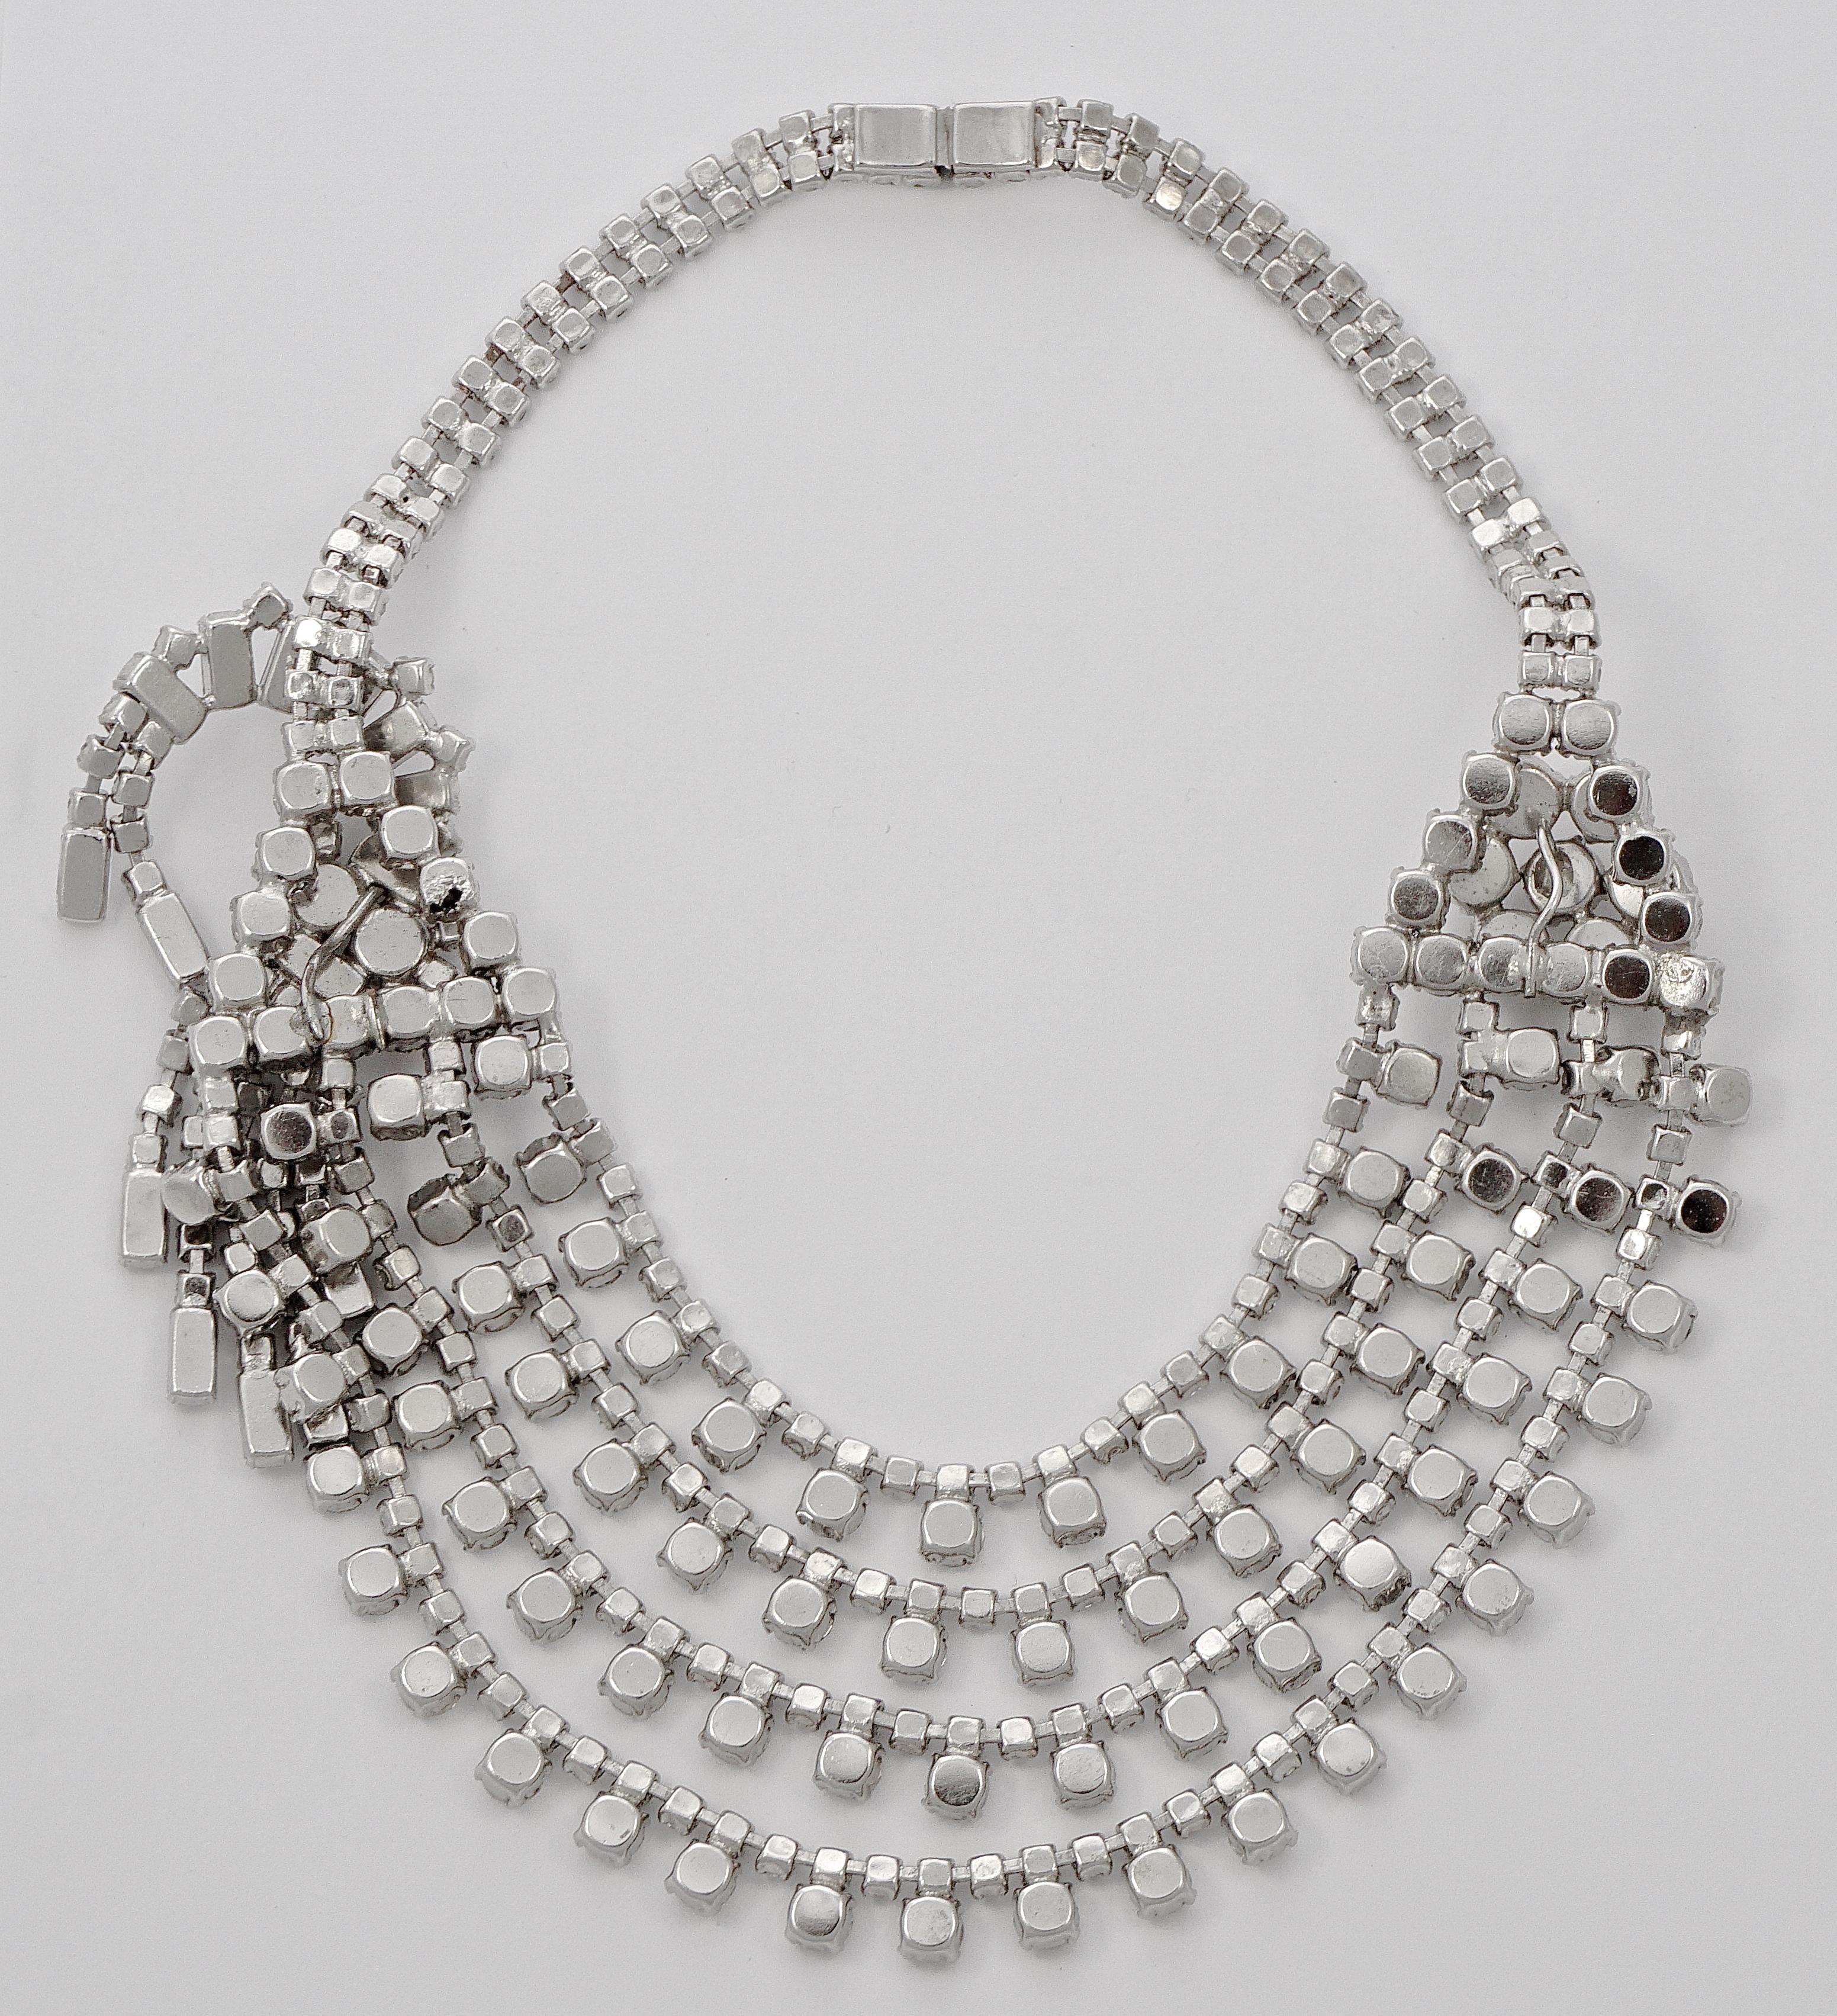 Silver Plated Four Strand Rhinestone Statement Collar Necklace circa 1950s For Sale 2